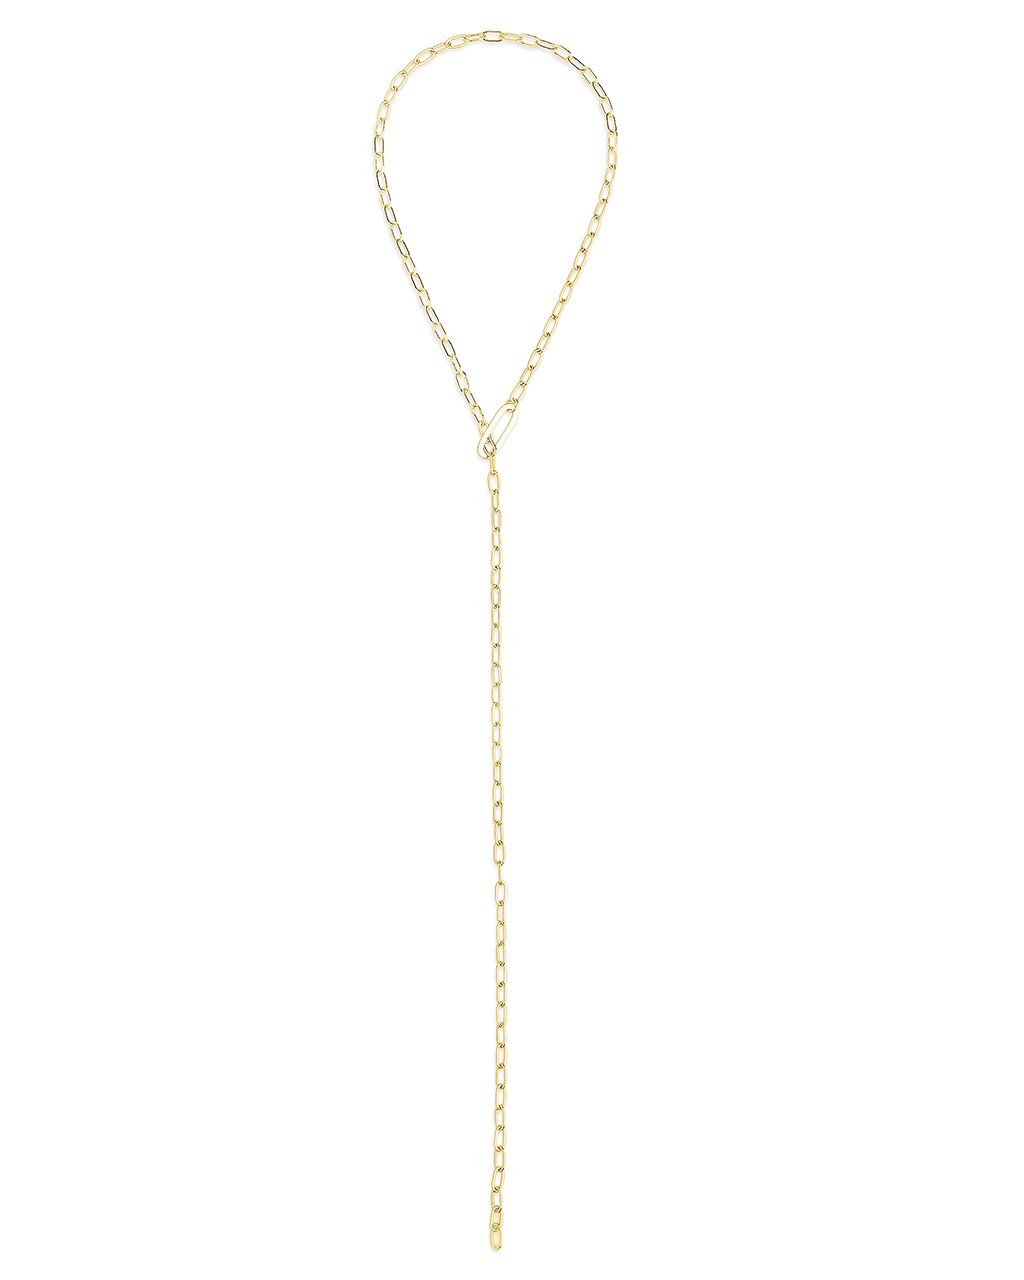 Chain Link Lariat Necklace - Sterling Forever